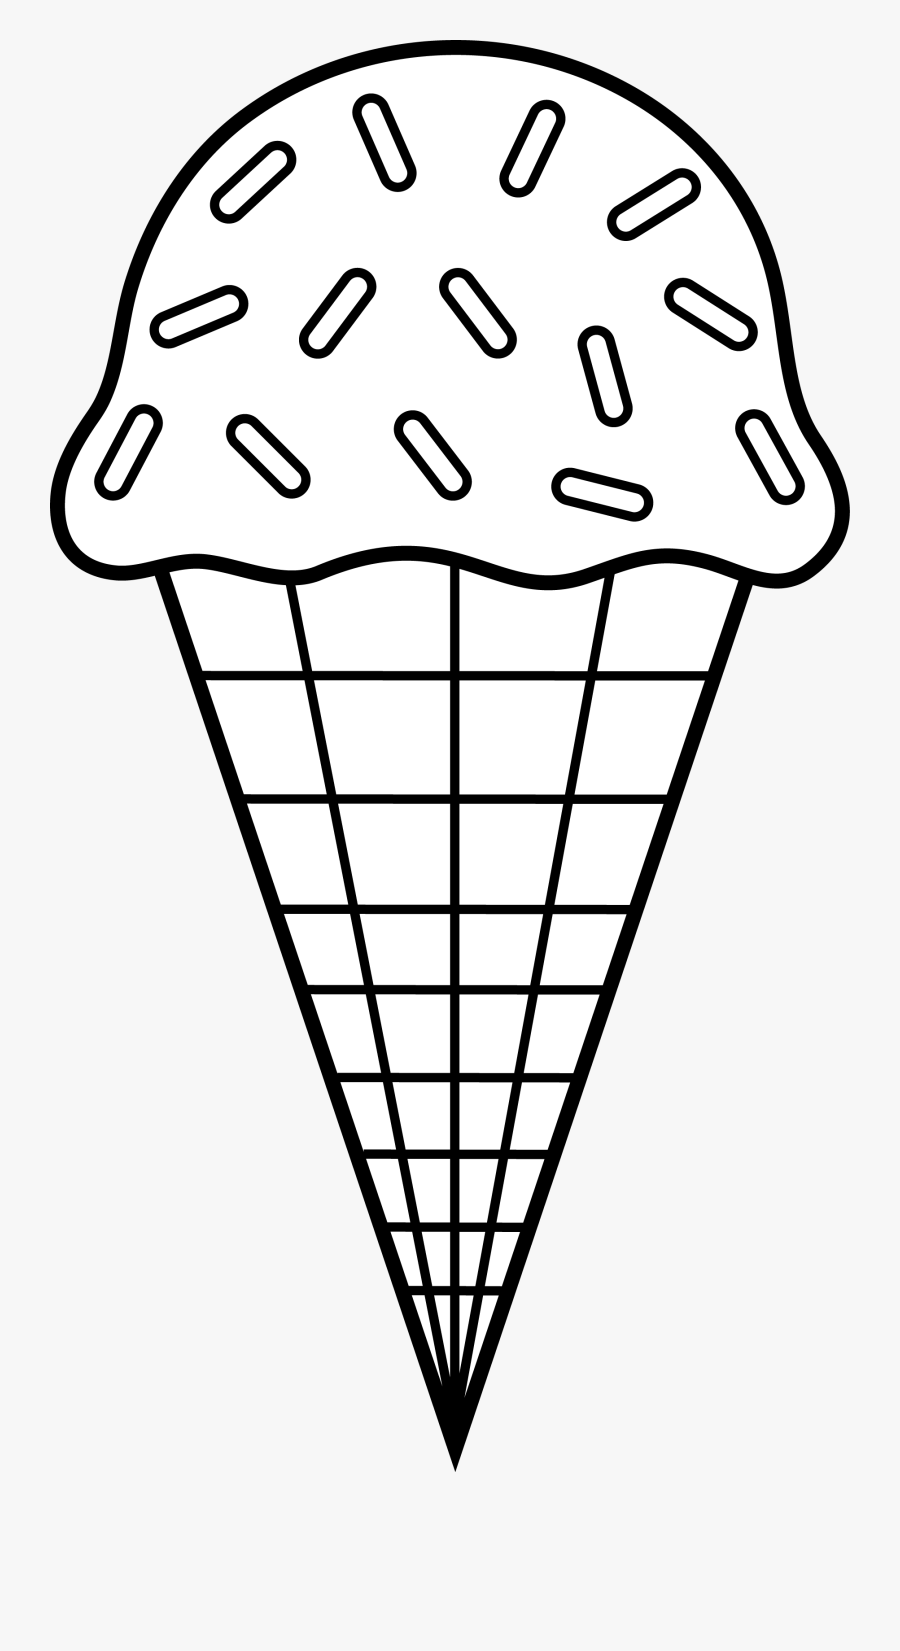 Ice Cream Black And White Clipart Black And White Ice - Ice Cream Clipart Black And White, Transparent Clipart